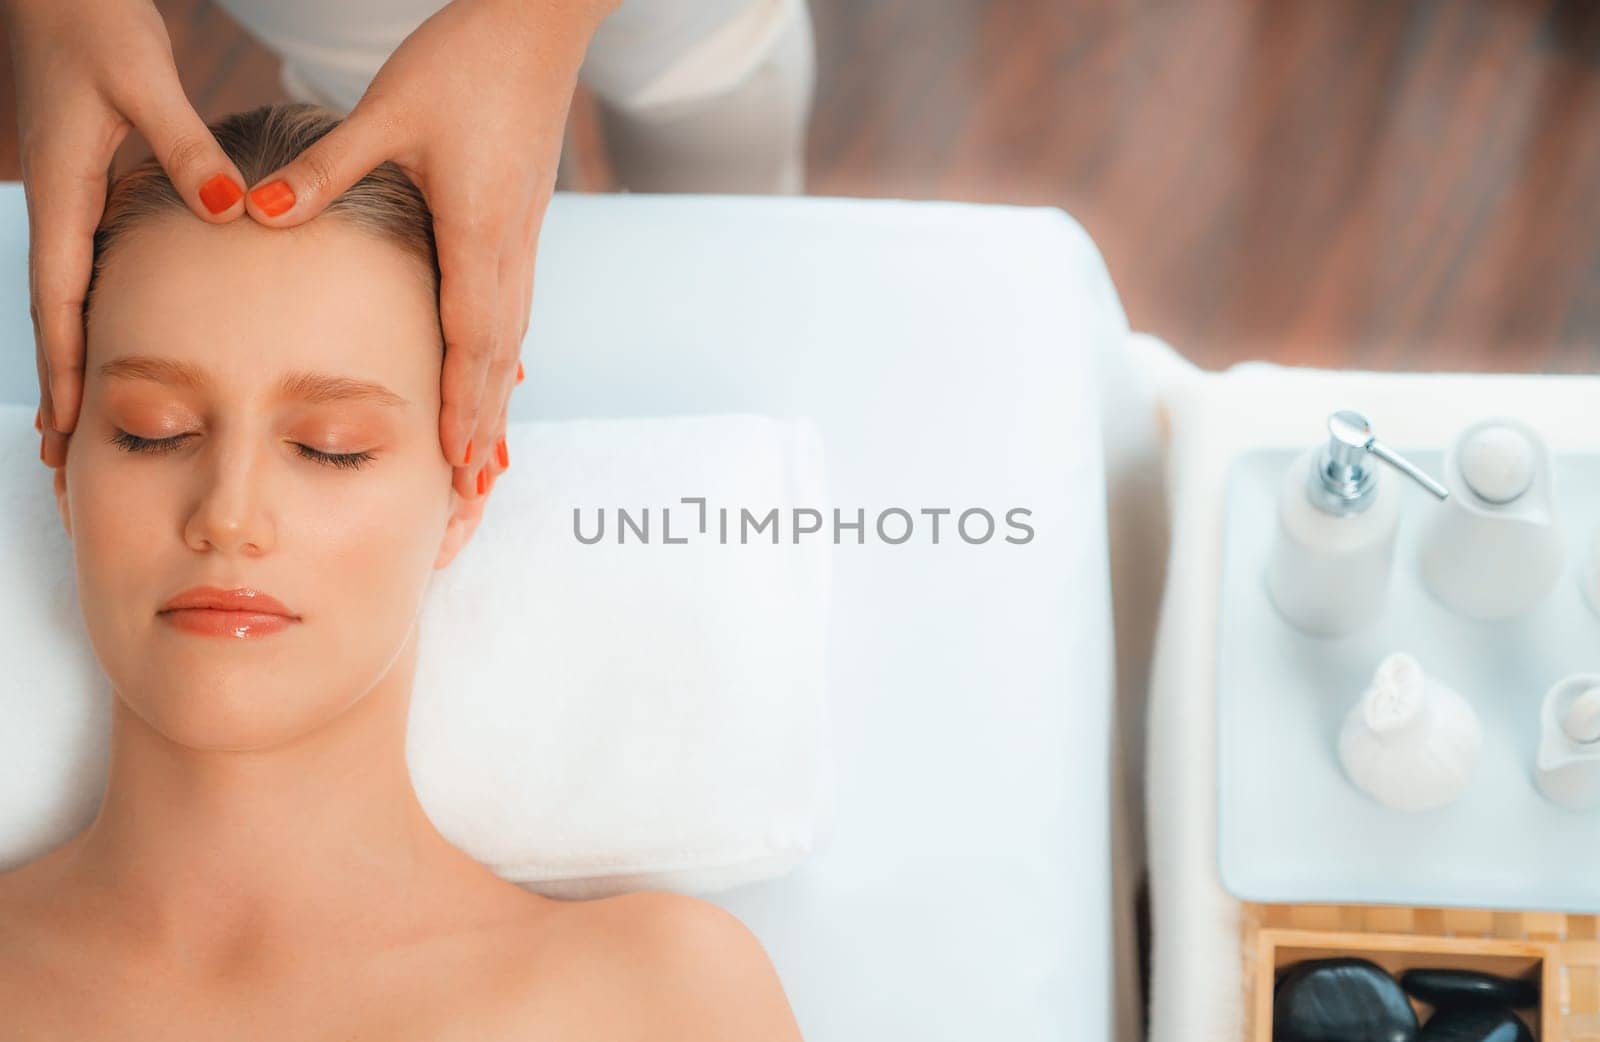 Panorama top view of woman enjoying relaxing anti-stress head massage and pampering facial beauty skin recreation leisure in dayspa modern light ambient at luxury resort or hotel spa salon. Quiescent